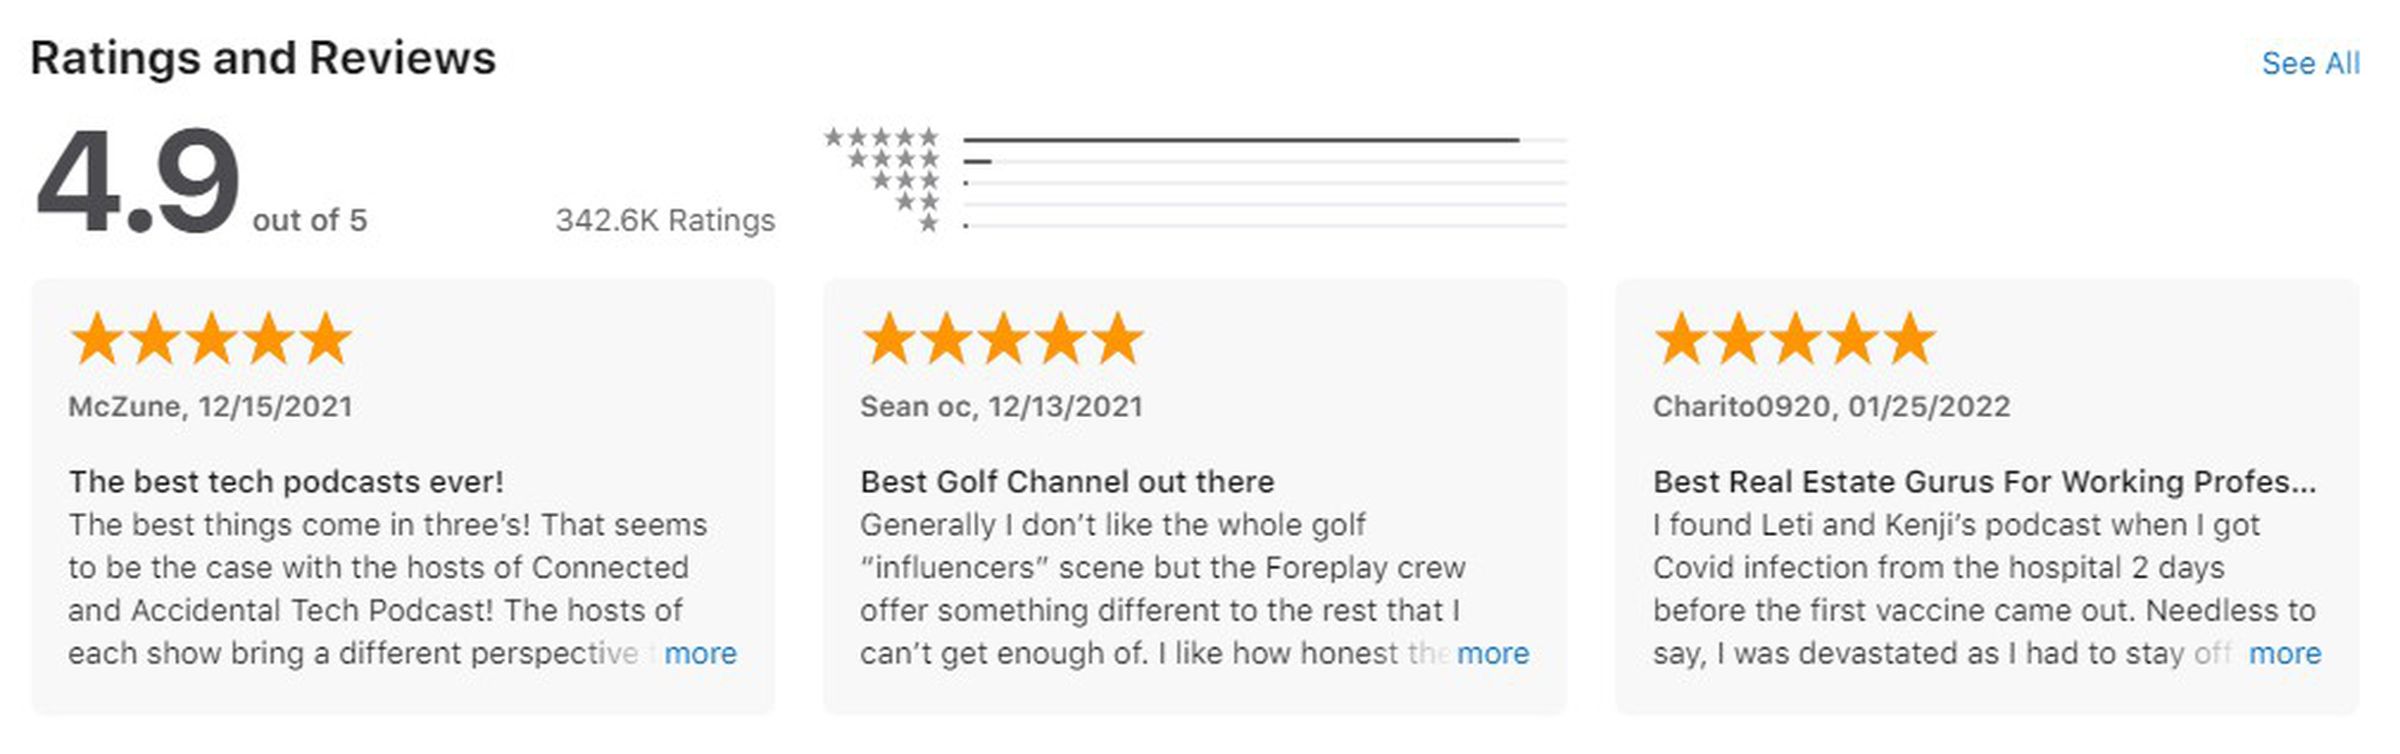 “The best tech podcasts ever!” “Best Golf Channel out there” and “Best Real Estate Gurus for Working Professionals” are among the app’s top ratings.